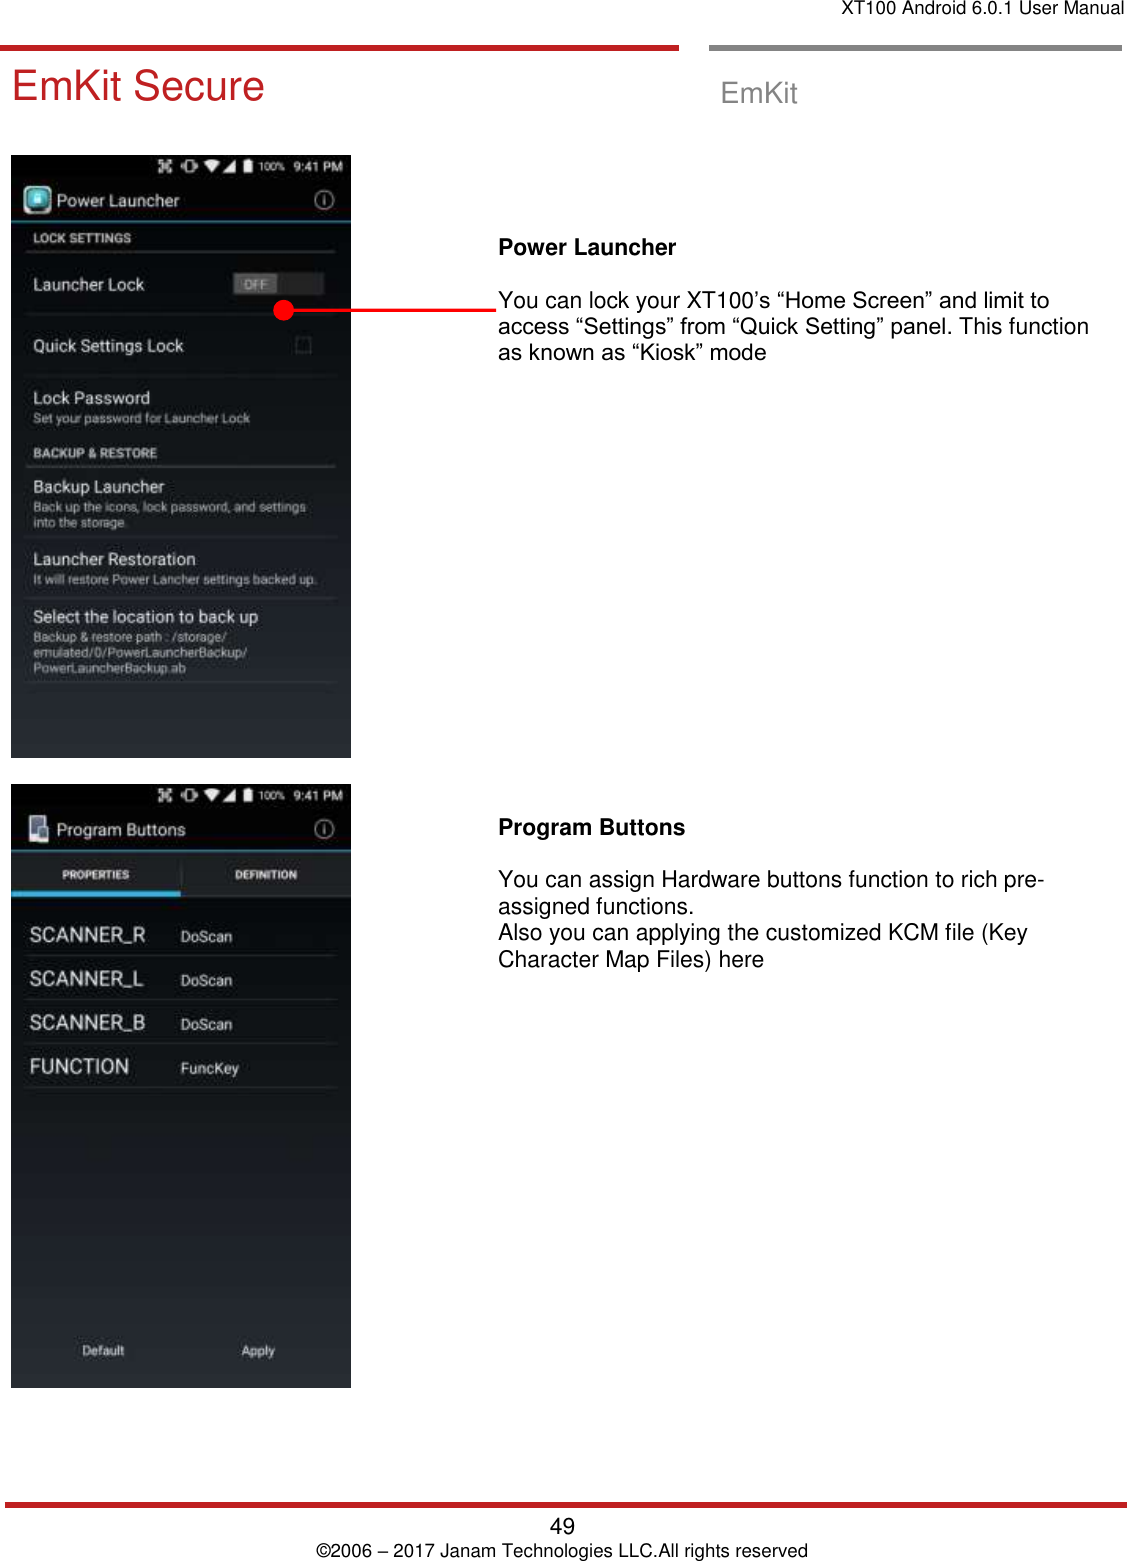 XT100 Android 6.0.1 User Manual   49 © 2006 – 2017 Janam Technologies LLC.All rights reserved  EmKit Secure  EmKit Secure   EmKit           Power Launcher  You can lock your XT100’s “Home Screen” and limit to access “Settings” from “Quick Setting” panel. This function as known as “Kiosk” mode                    Program Buttons   You can assign Hardware buttons function to rich pre-assigned functions.  Also you can applying the customized KCM file (Key Character Map Files) here  